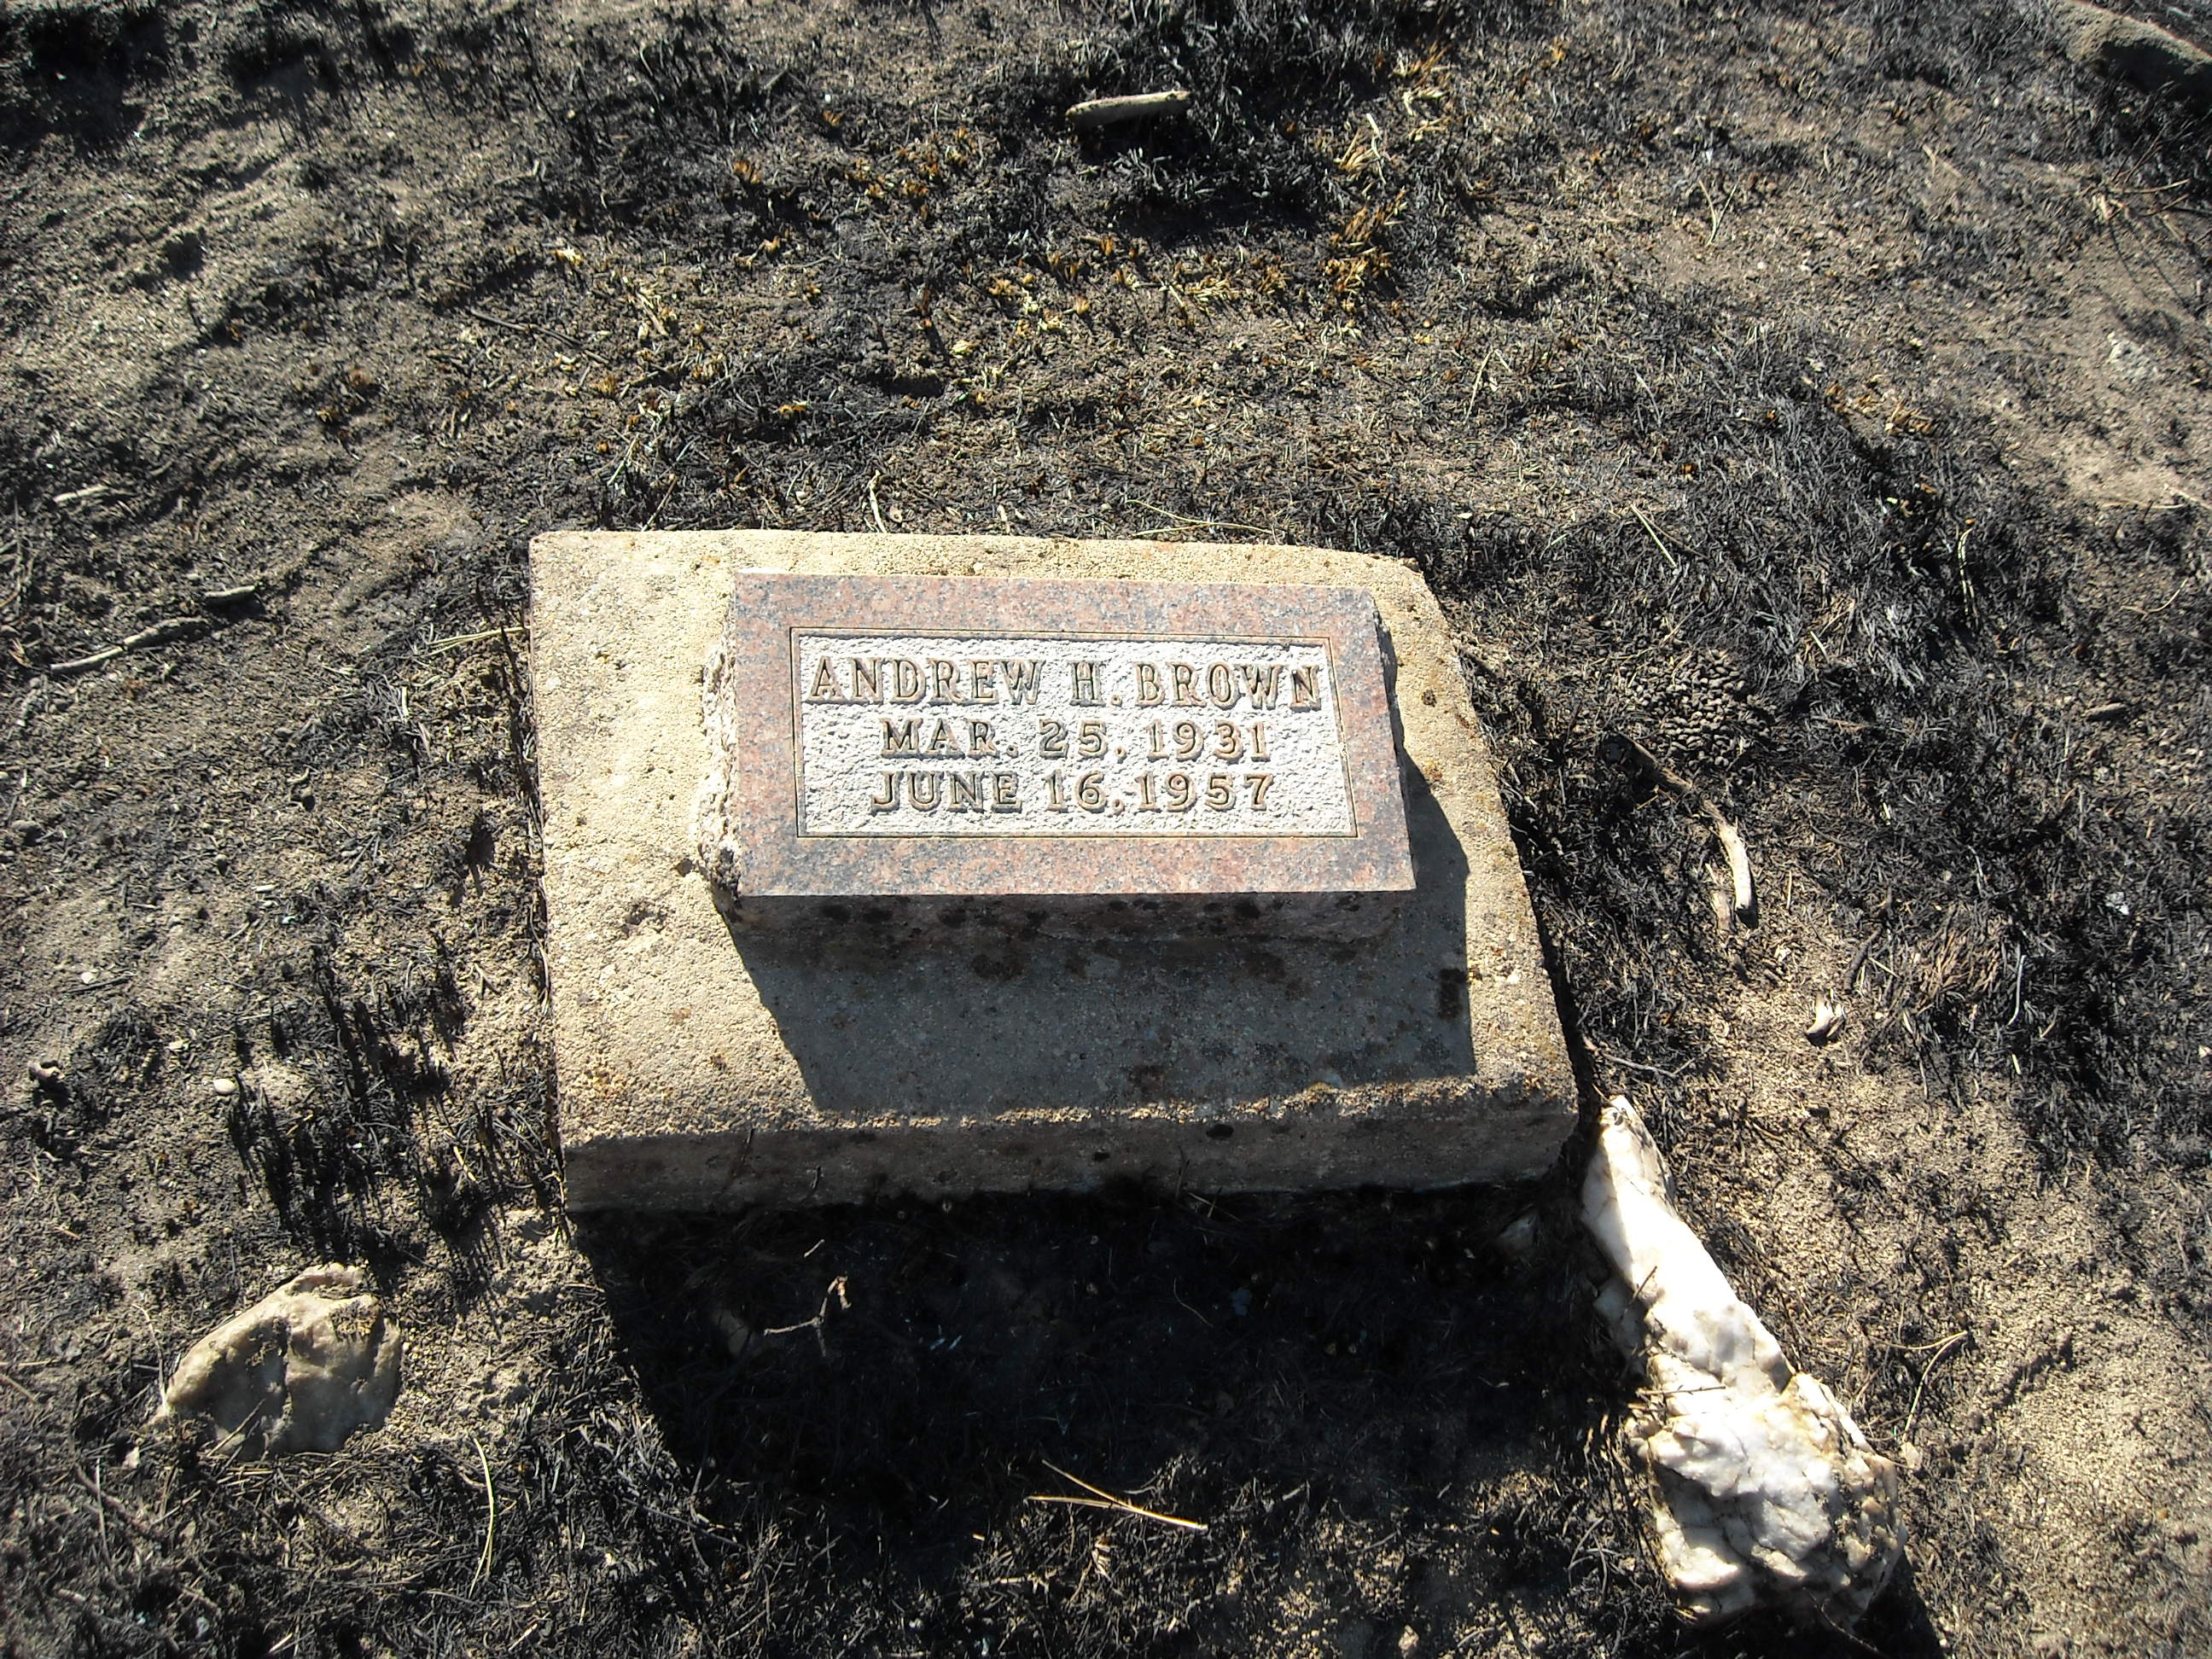 Marker after fire